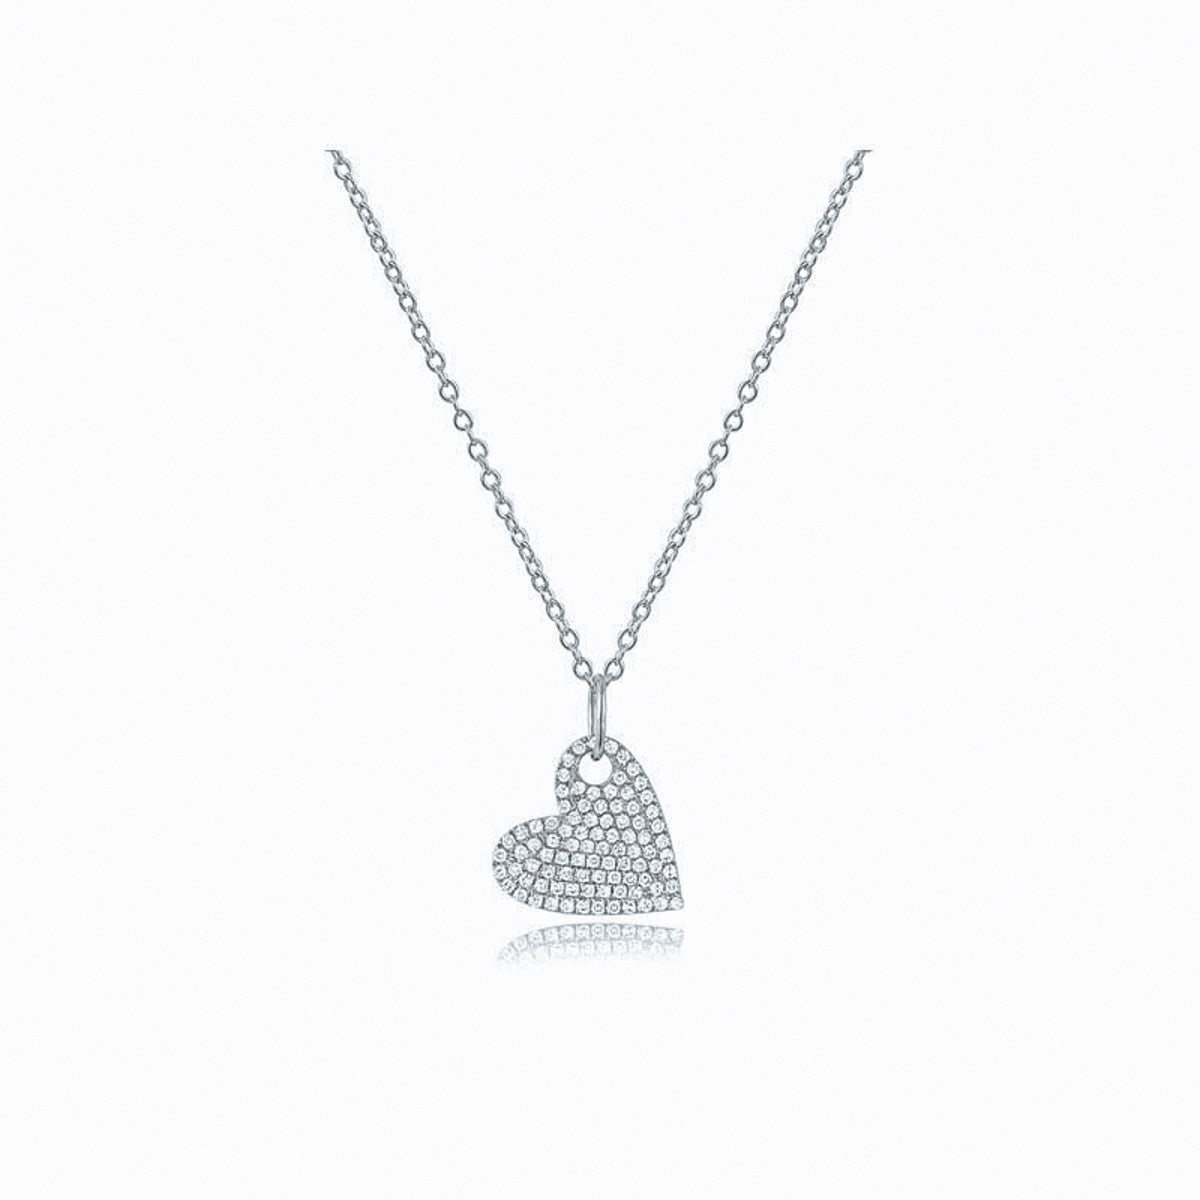 Diamond Accent Tilted Heart Necklace 10K Yellow Gold 18